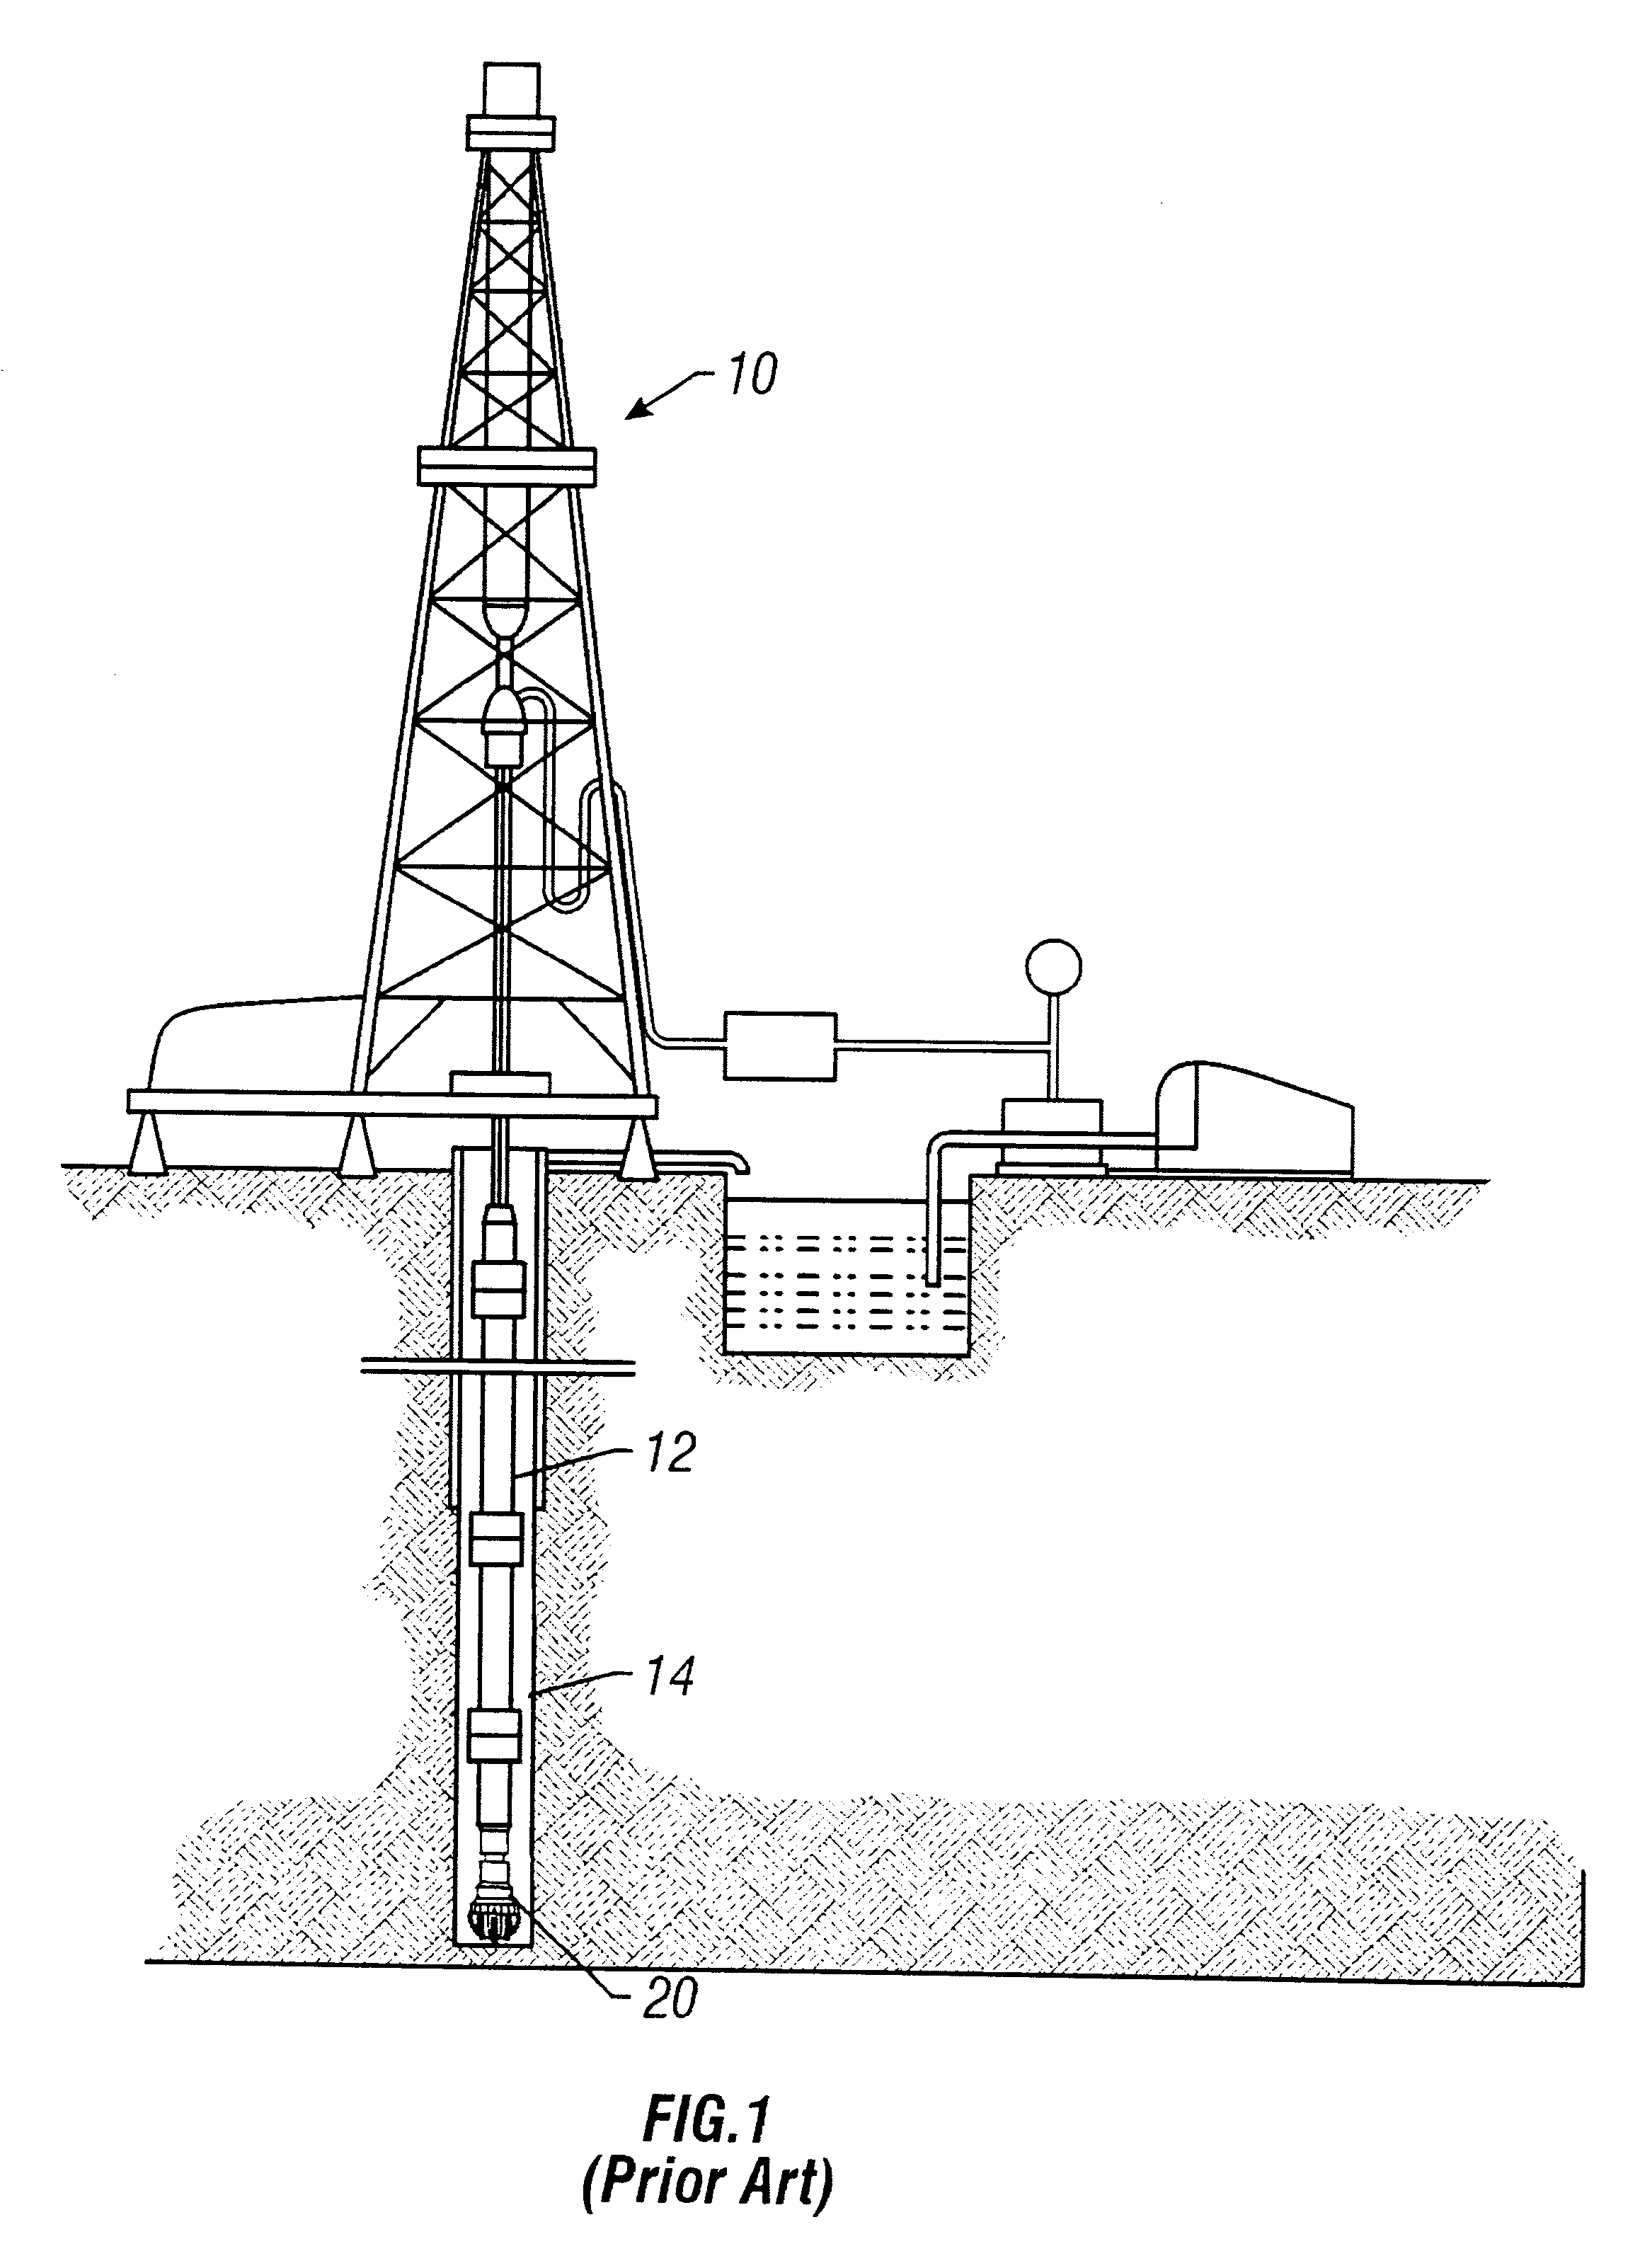 Method for simulating drilling of roller cone bits and its application to roller cone bit design and performance